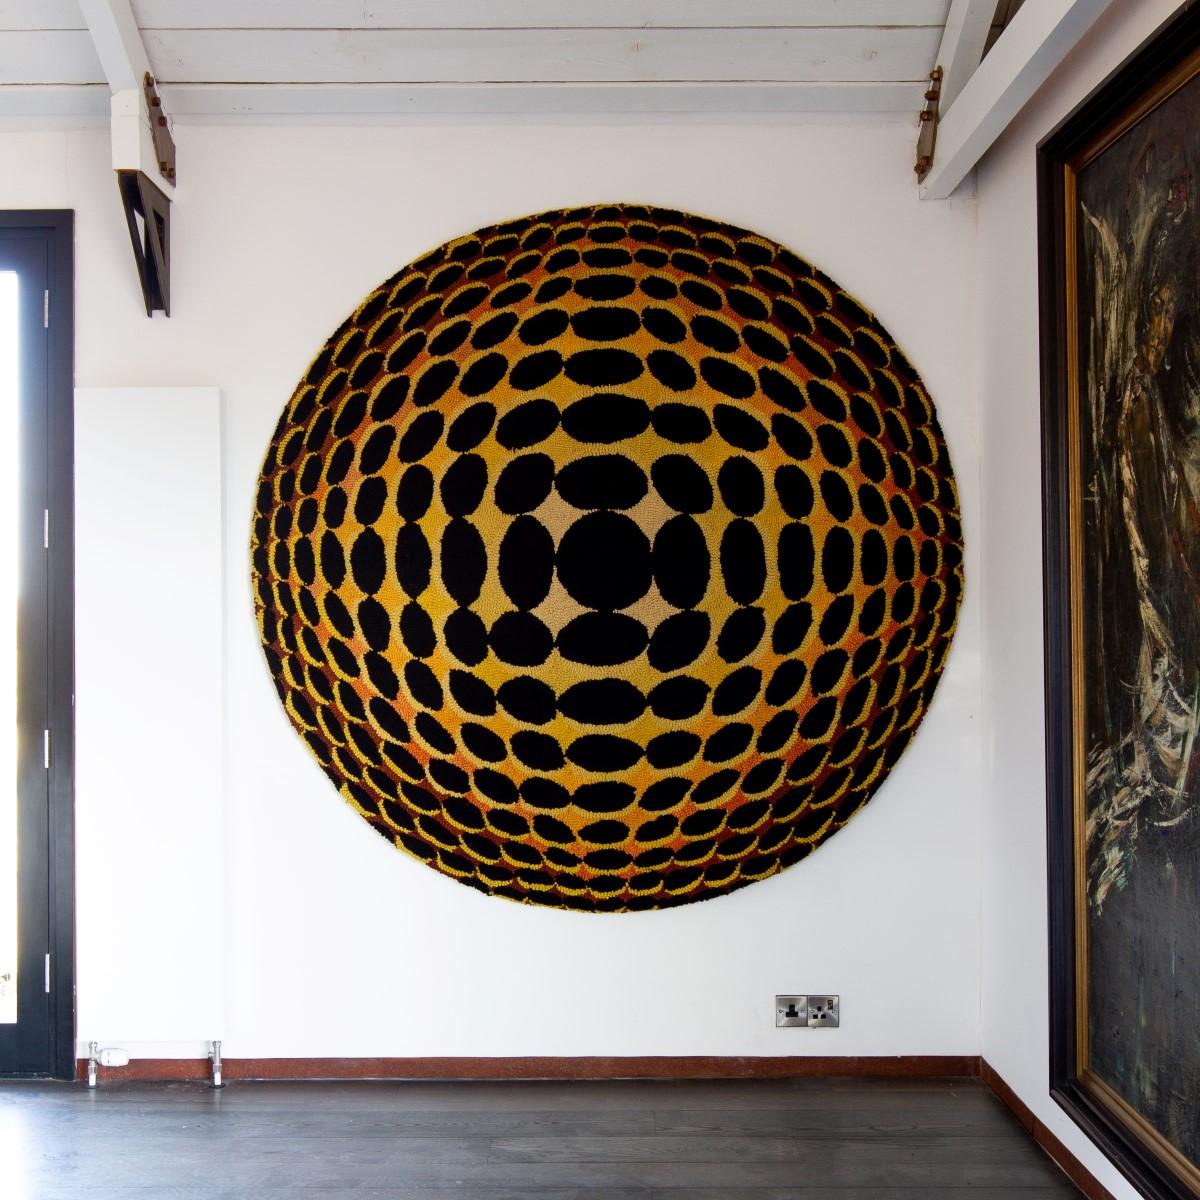 A huge circular Optical Art wool woven wall sculpture panel, 1970s

During the 1960s Op Art or Optical Illusion Art burst onto the scene drawing on colour theory and the physiology and psychology of perception. The effects created by op art ranged